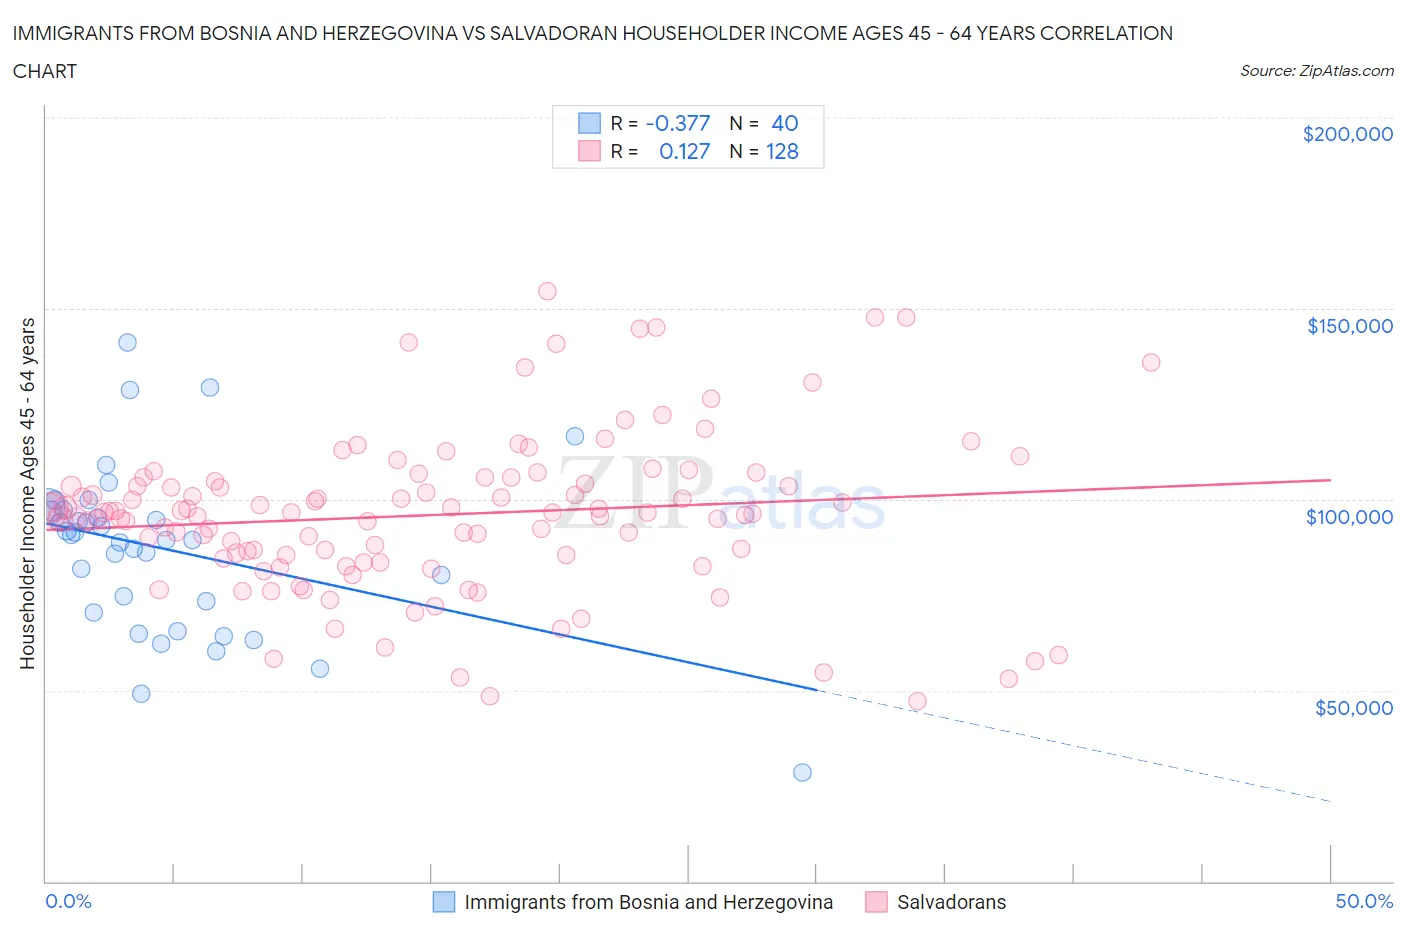 Immigrants from Bosnia and Herzegovina vs Salvadoran Householder Income Ages 45 - 64 years